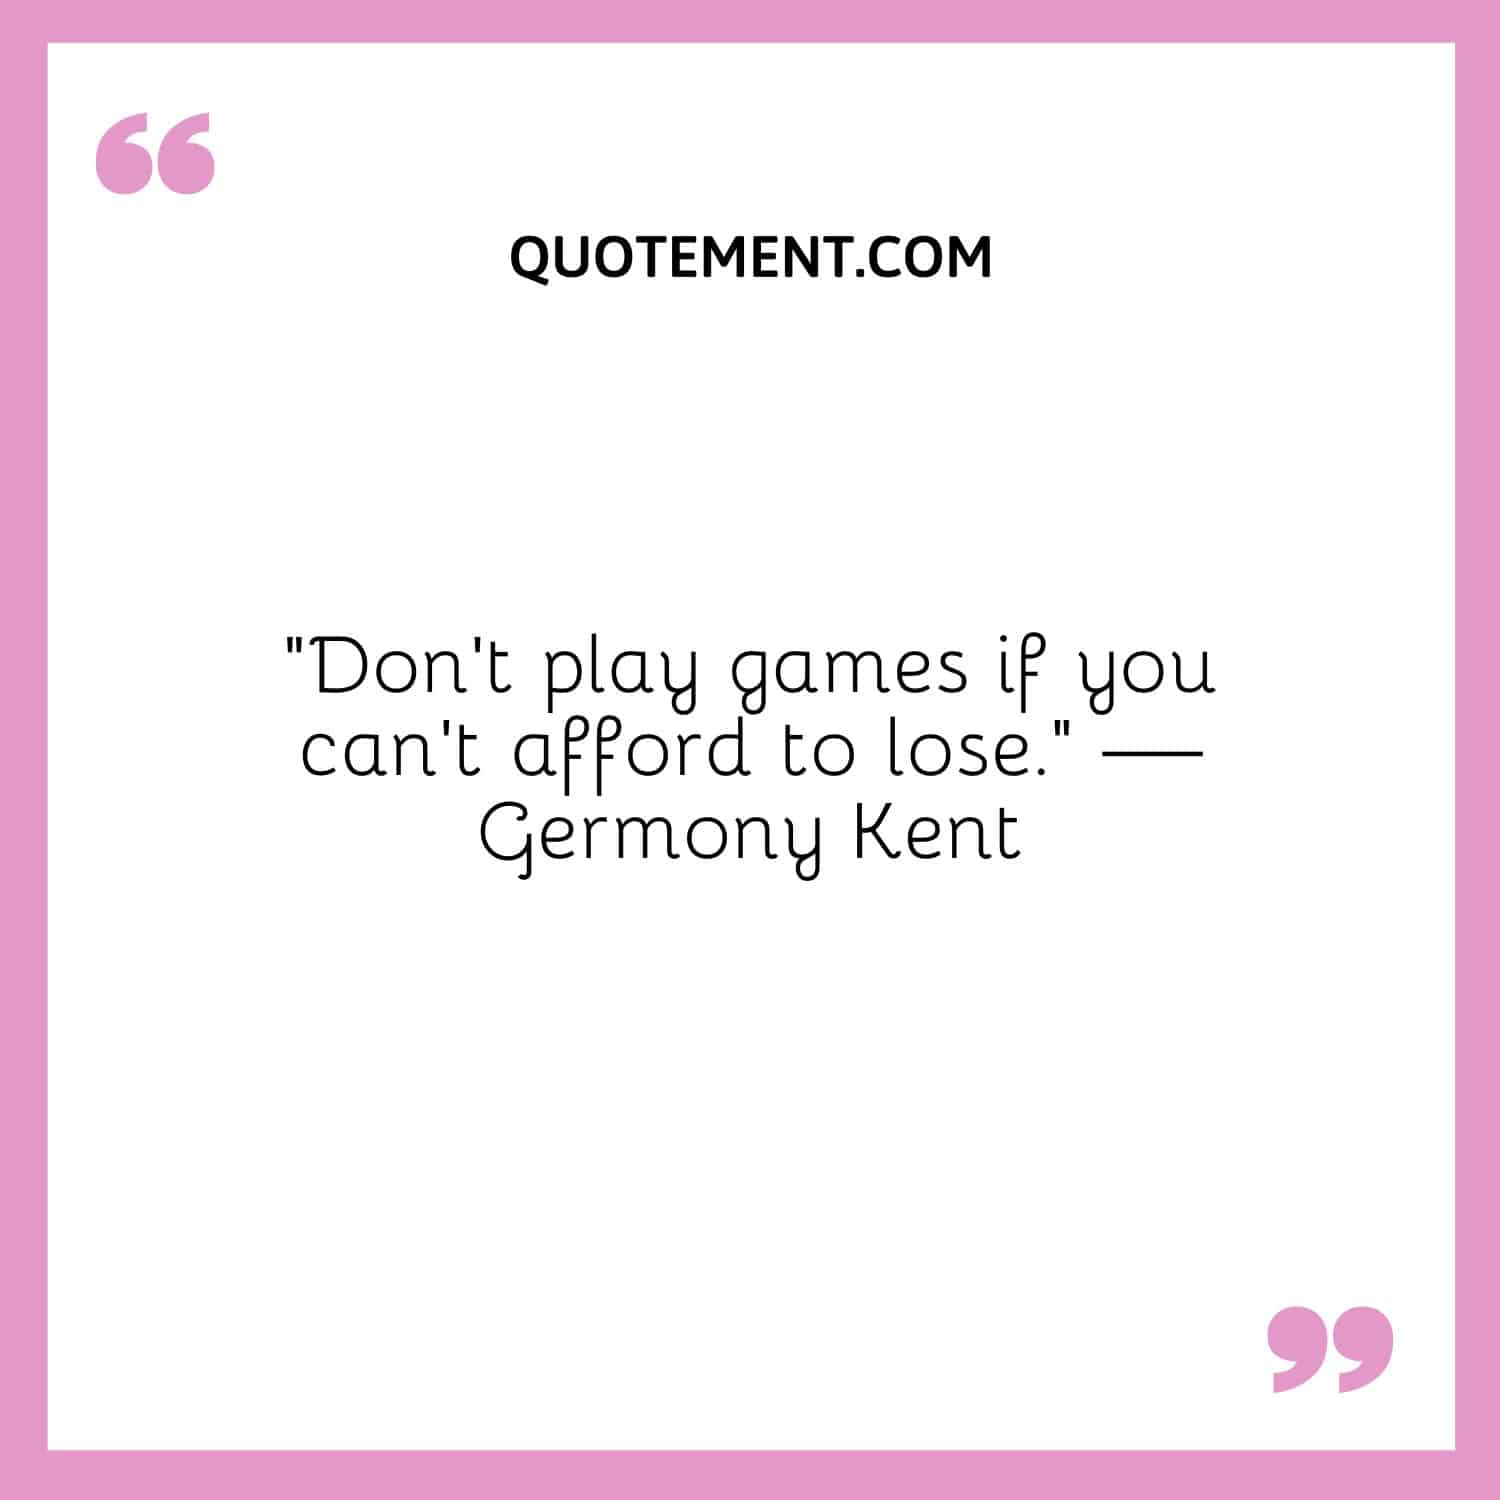 Don’t play games if you can’t afford to lose